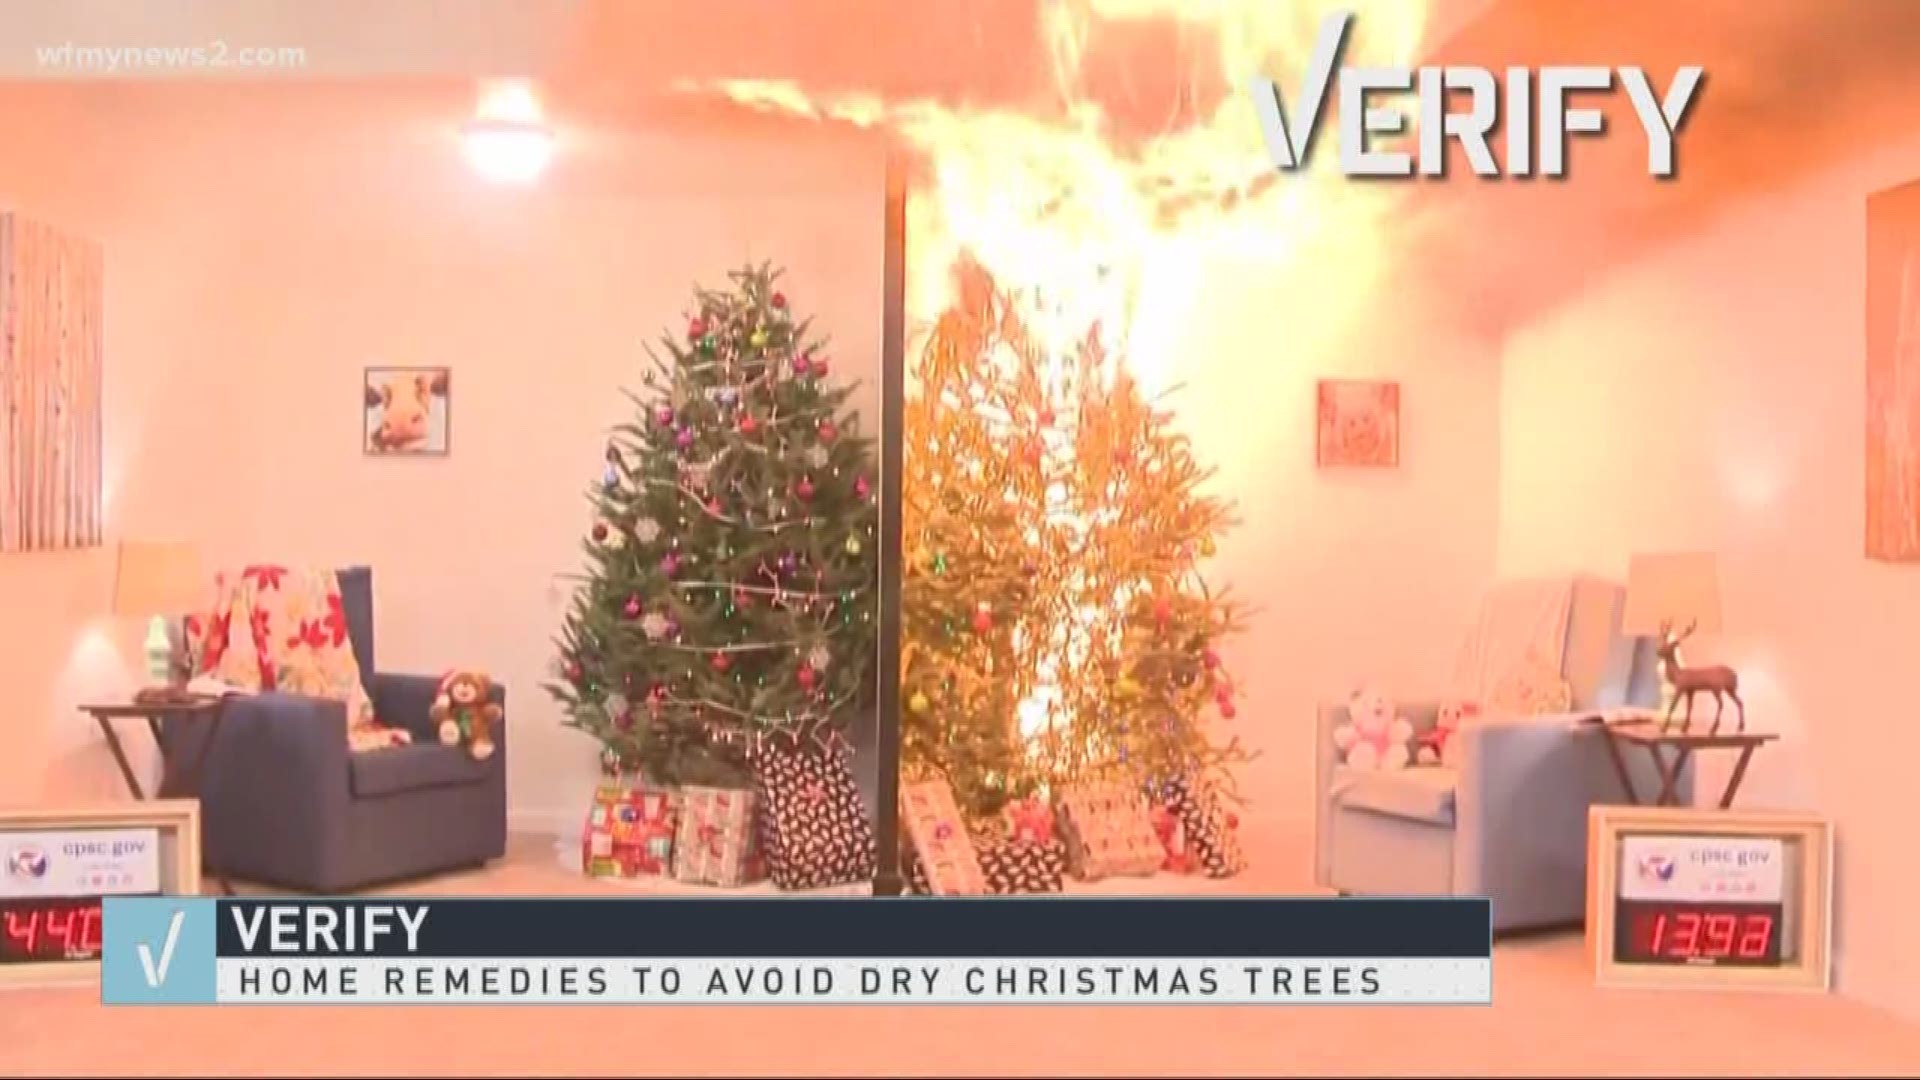 Can you add aspirin, alcohol or another home product to your Christmas tree to prevent it from drying out? Our DC sister station set out to VERIFY.